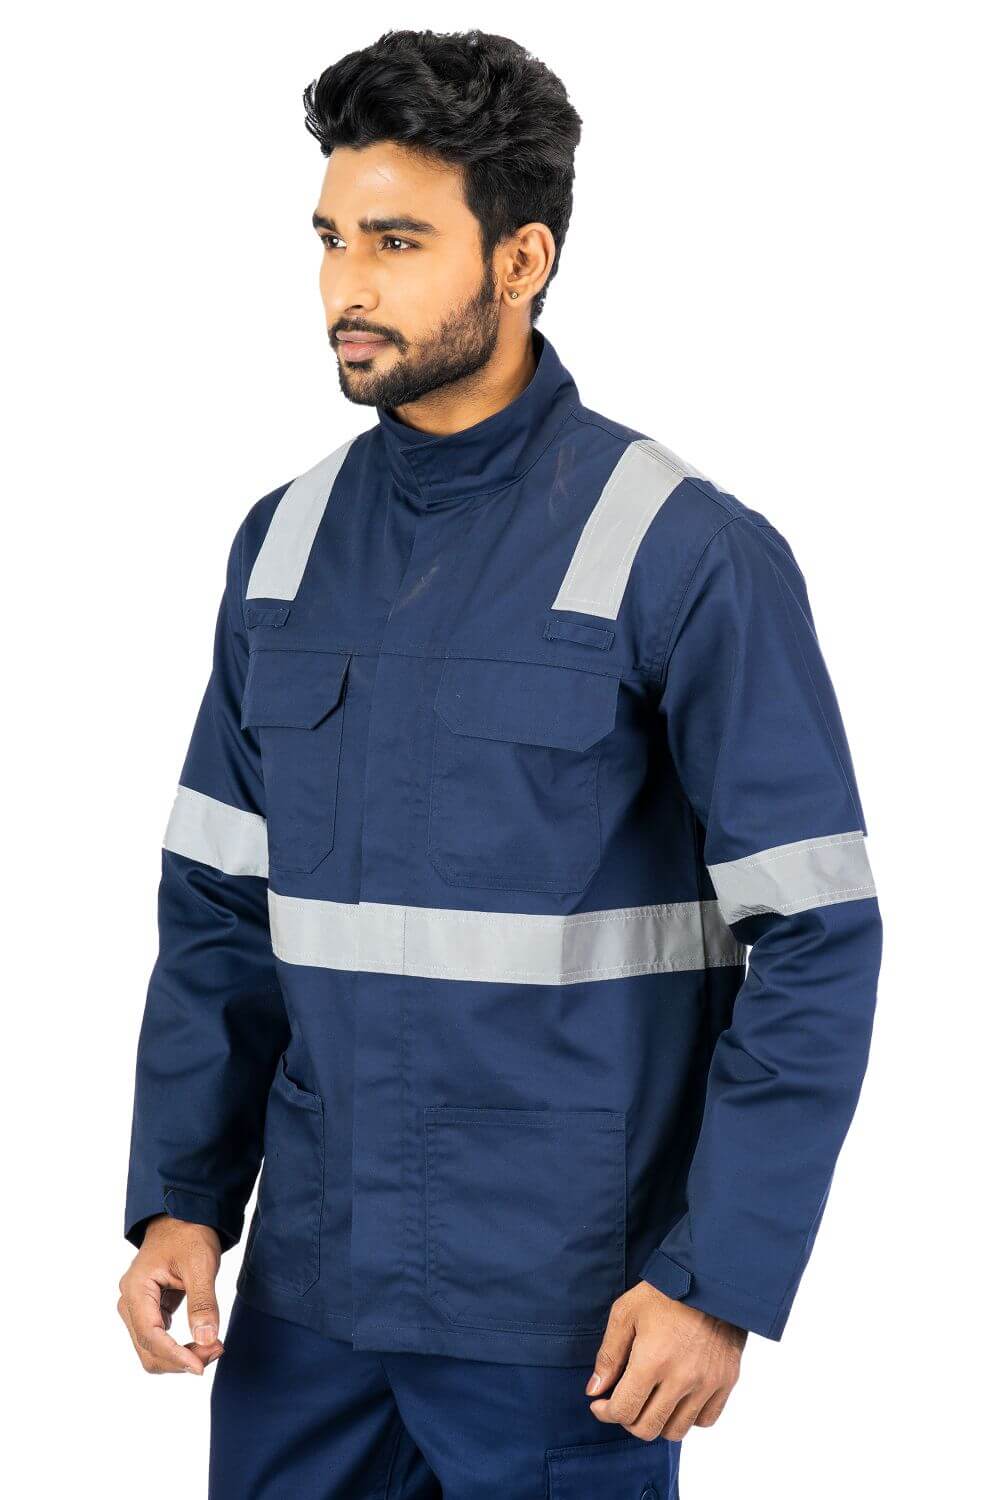 Industrial work jacket designed to provide optimum comfort and mobility during the strenuous hours at work.